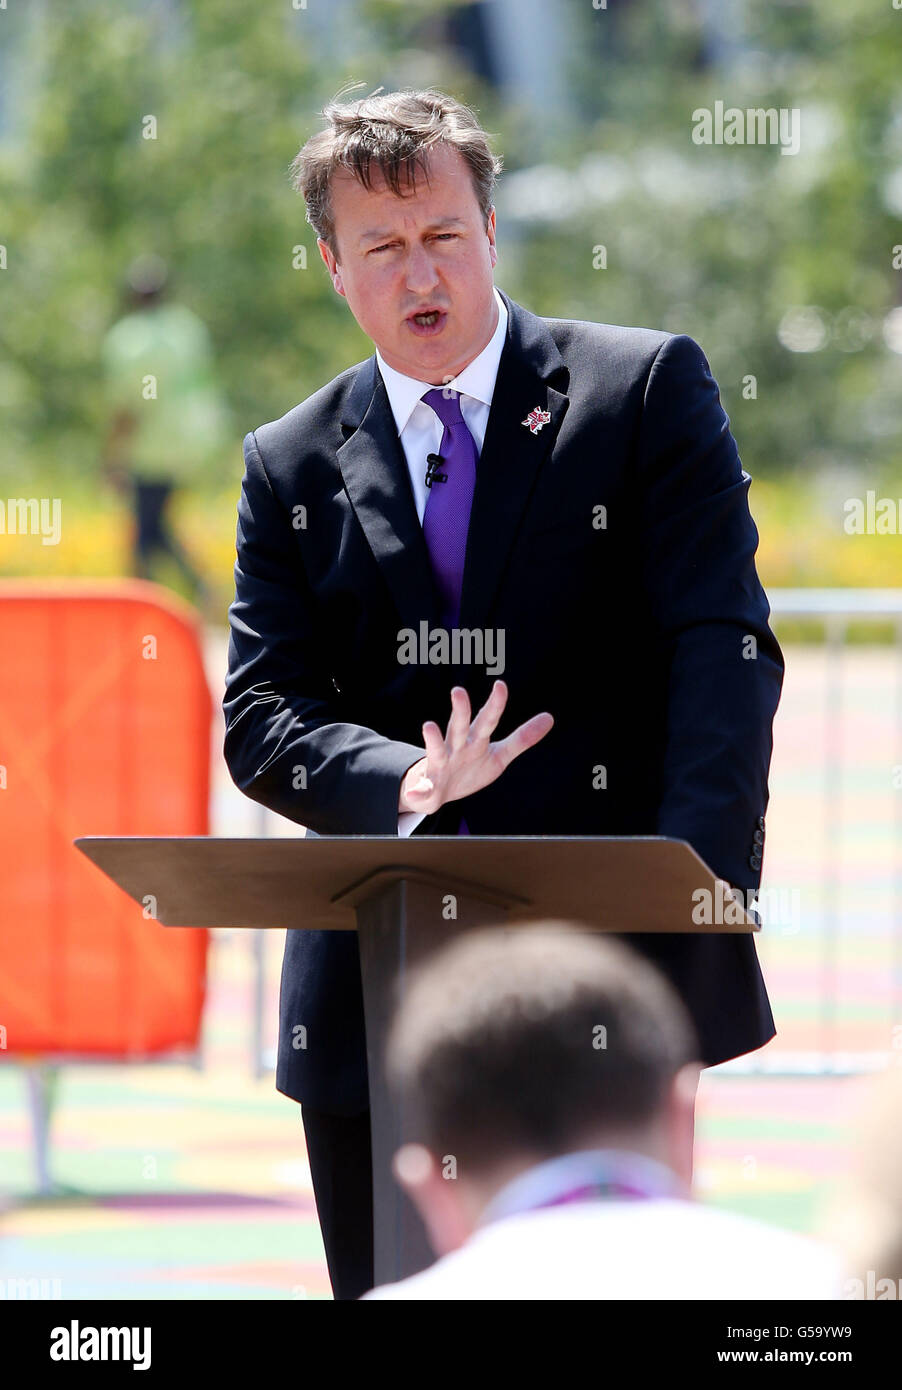 Cameron visits Olympic Park. Prime Minster David Cameron speaks to the media during a visit to the Olympic Park at Stratford. London. Stock Photo